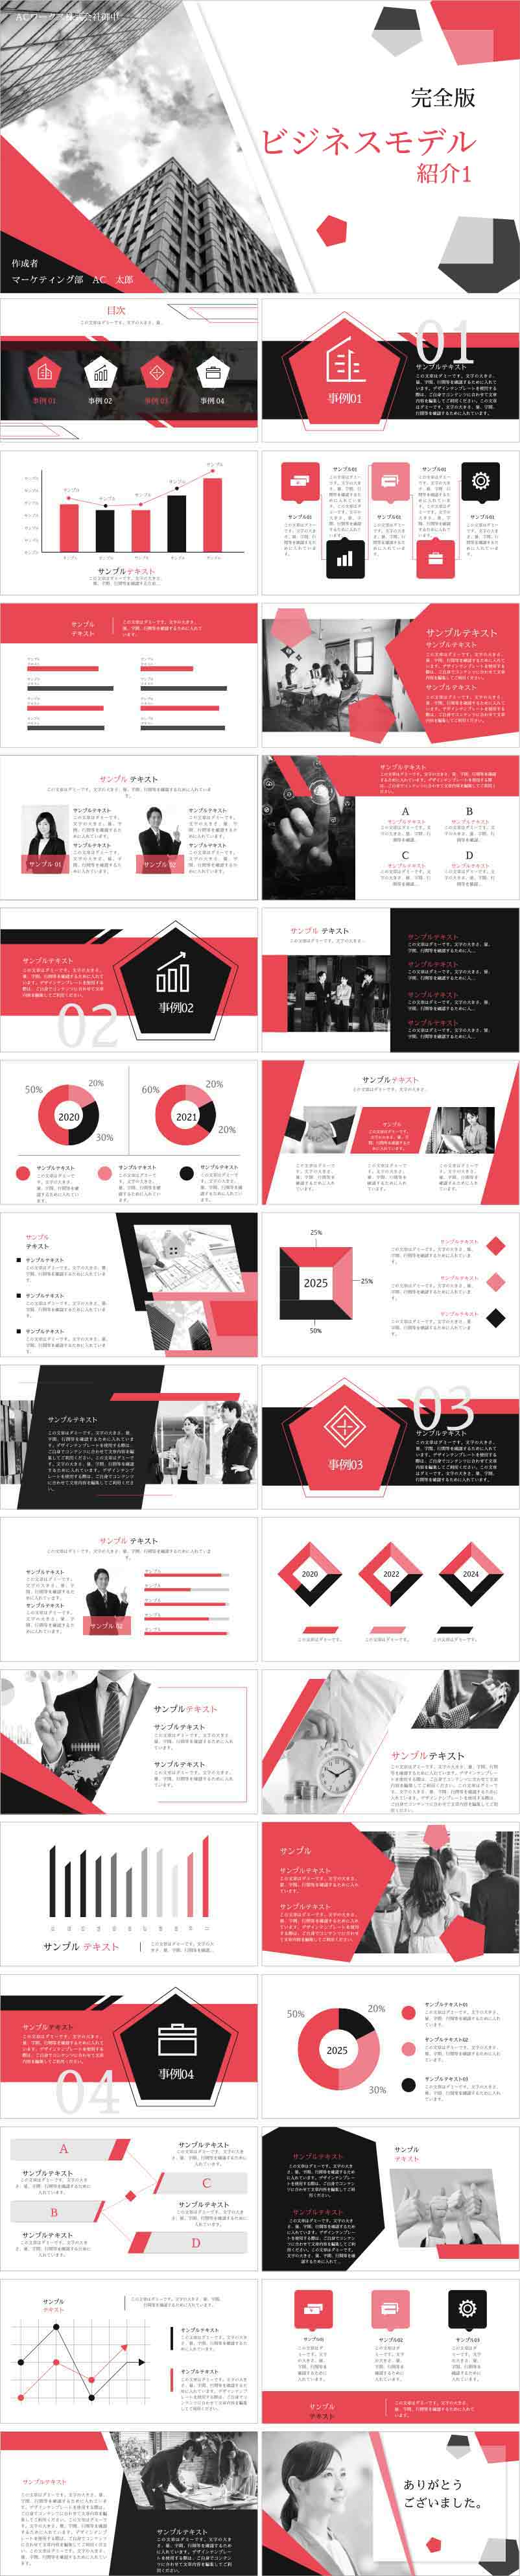 PowerPoint template vol.87